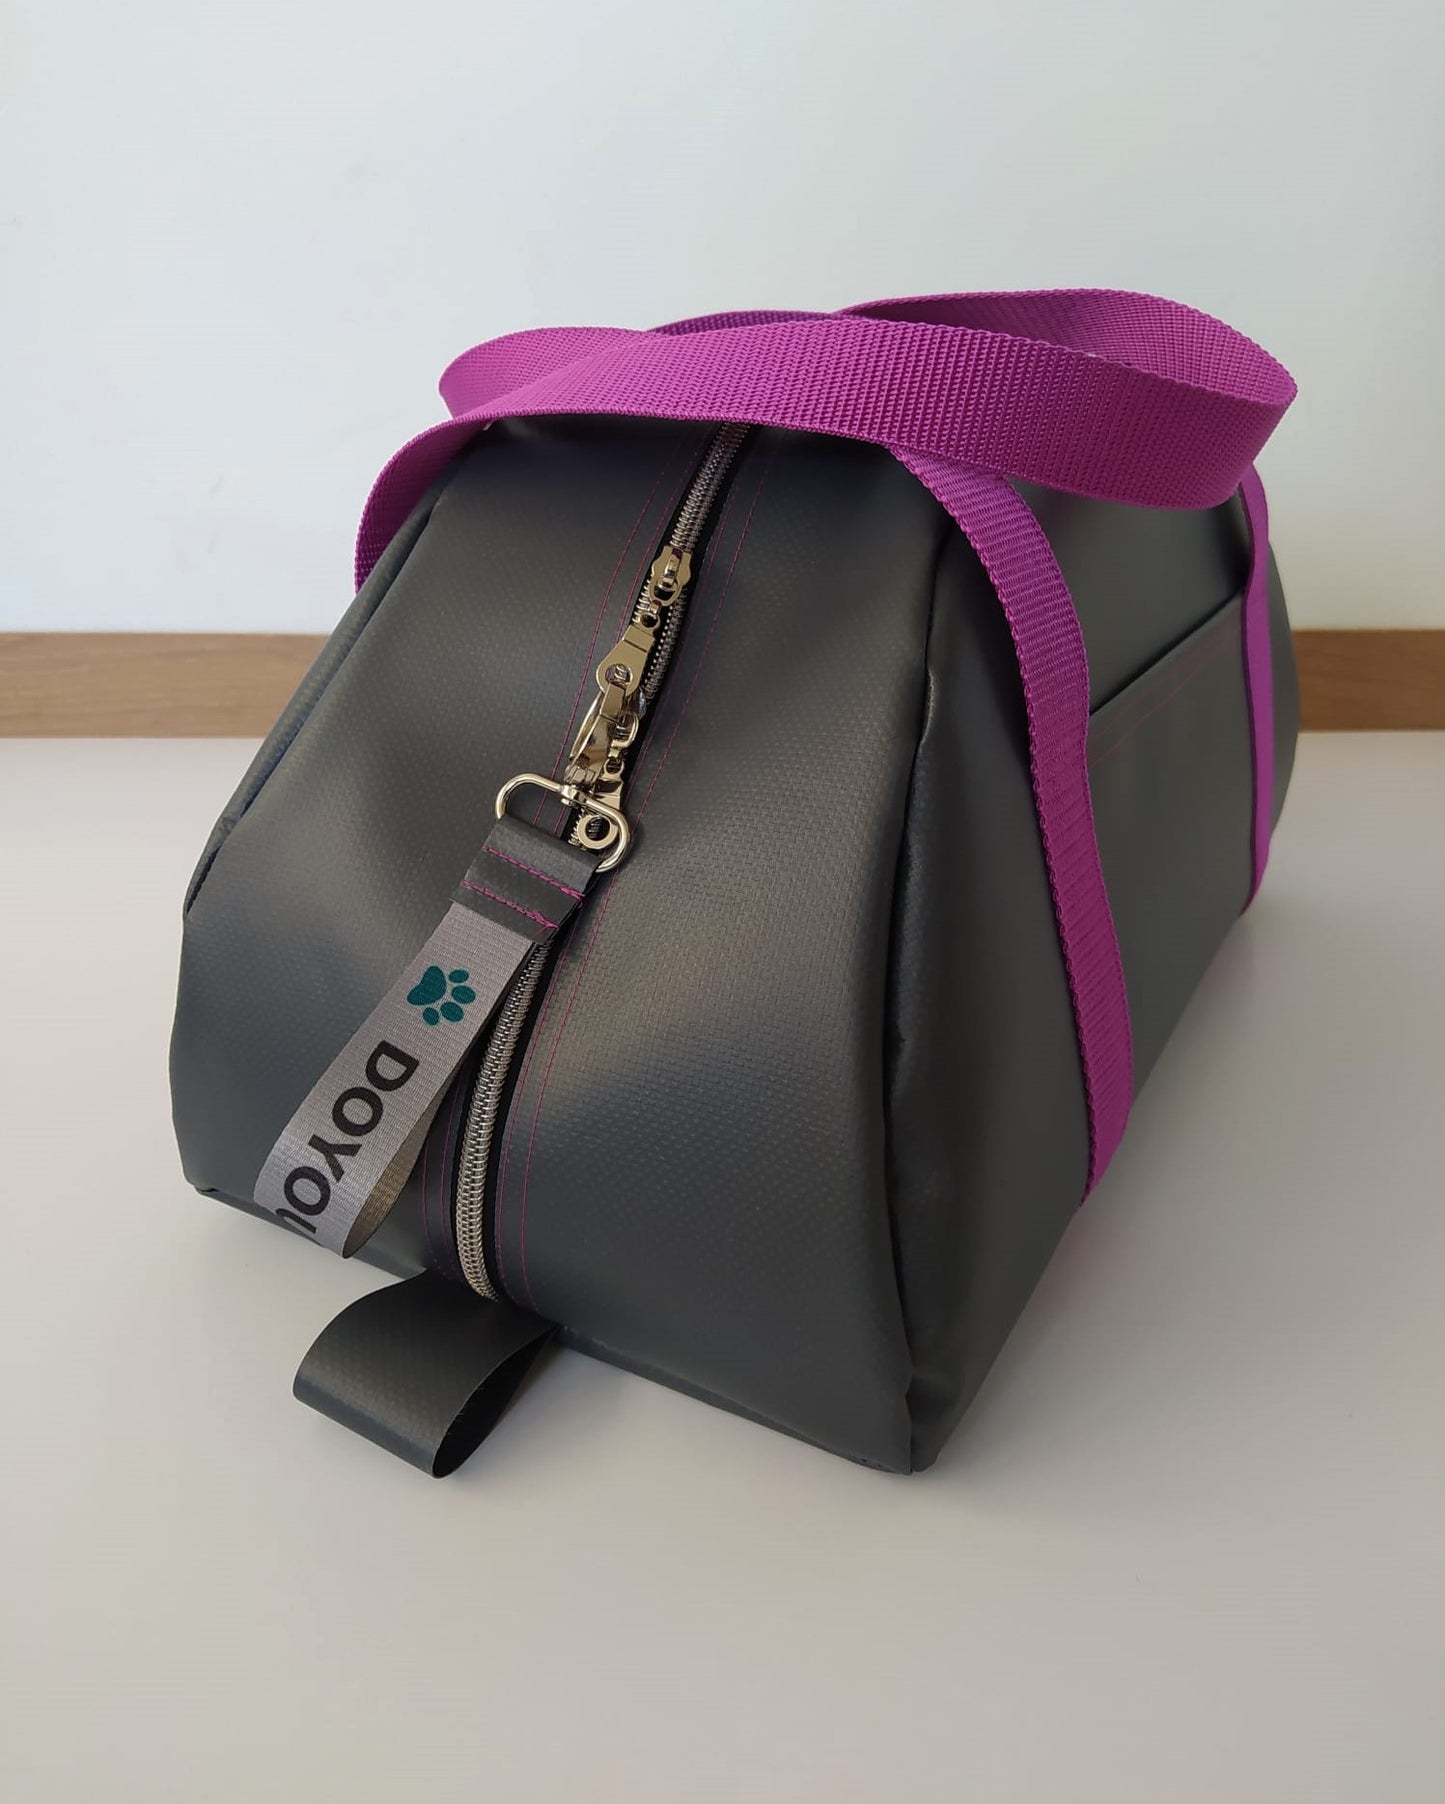 Accessories: Bag for Treat & Train